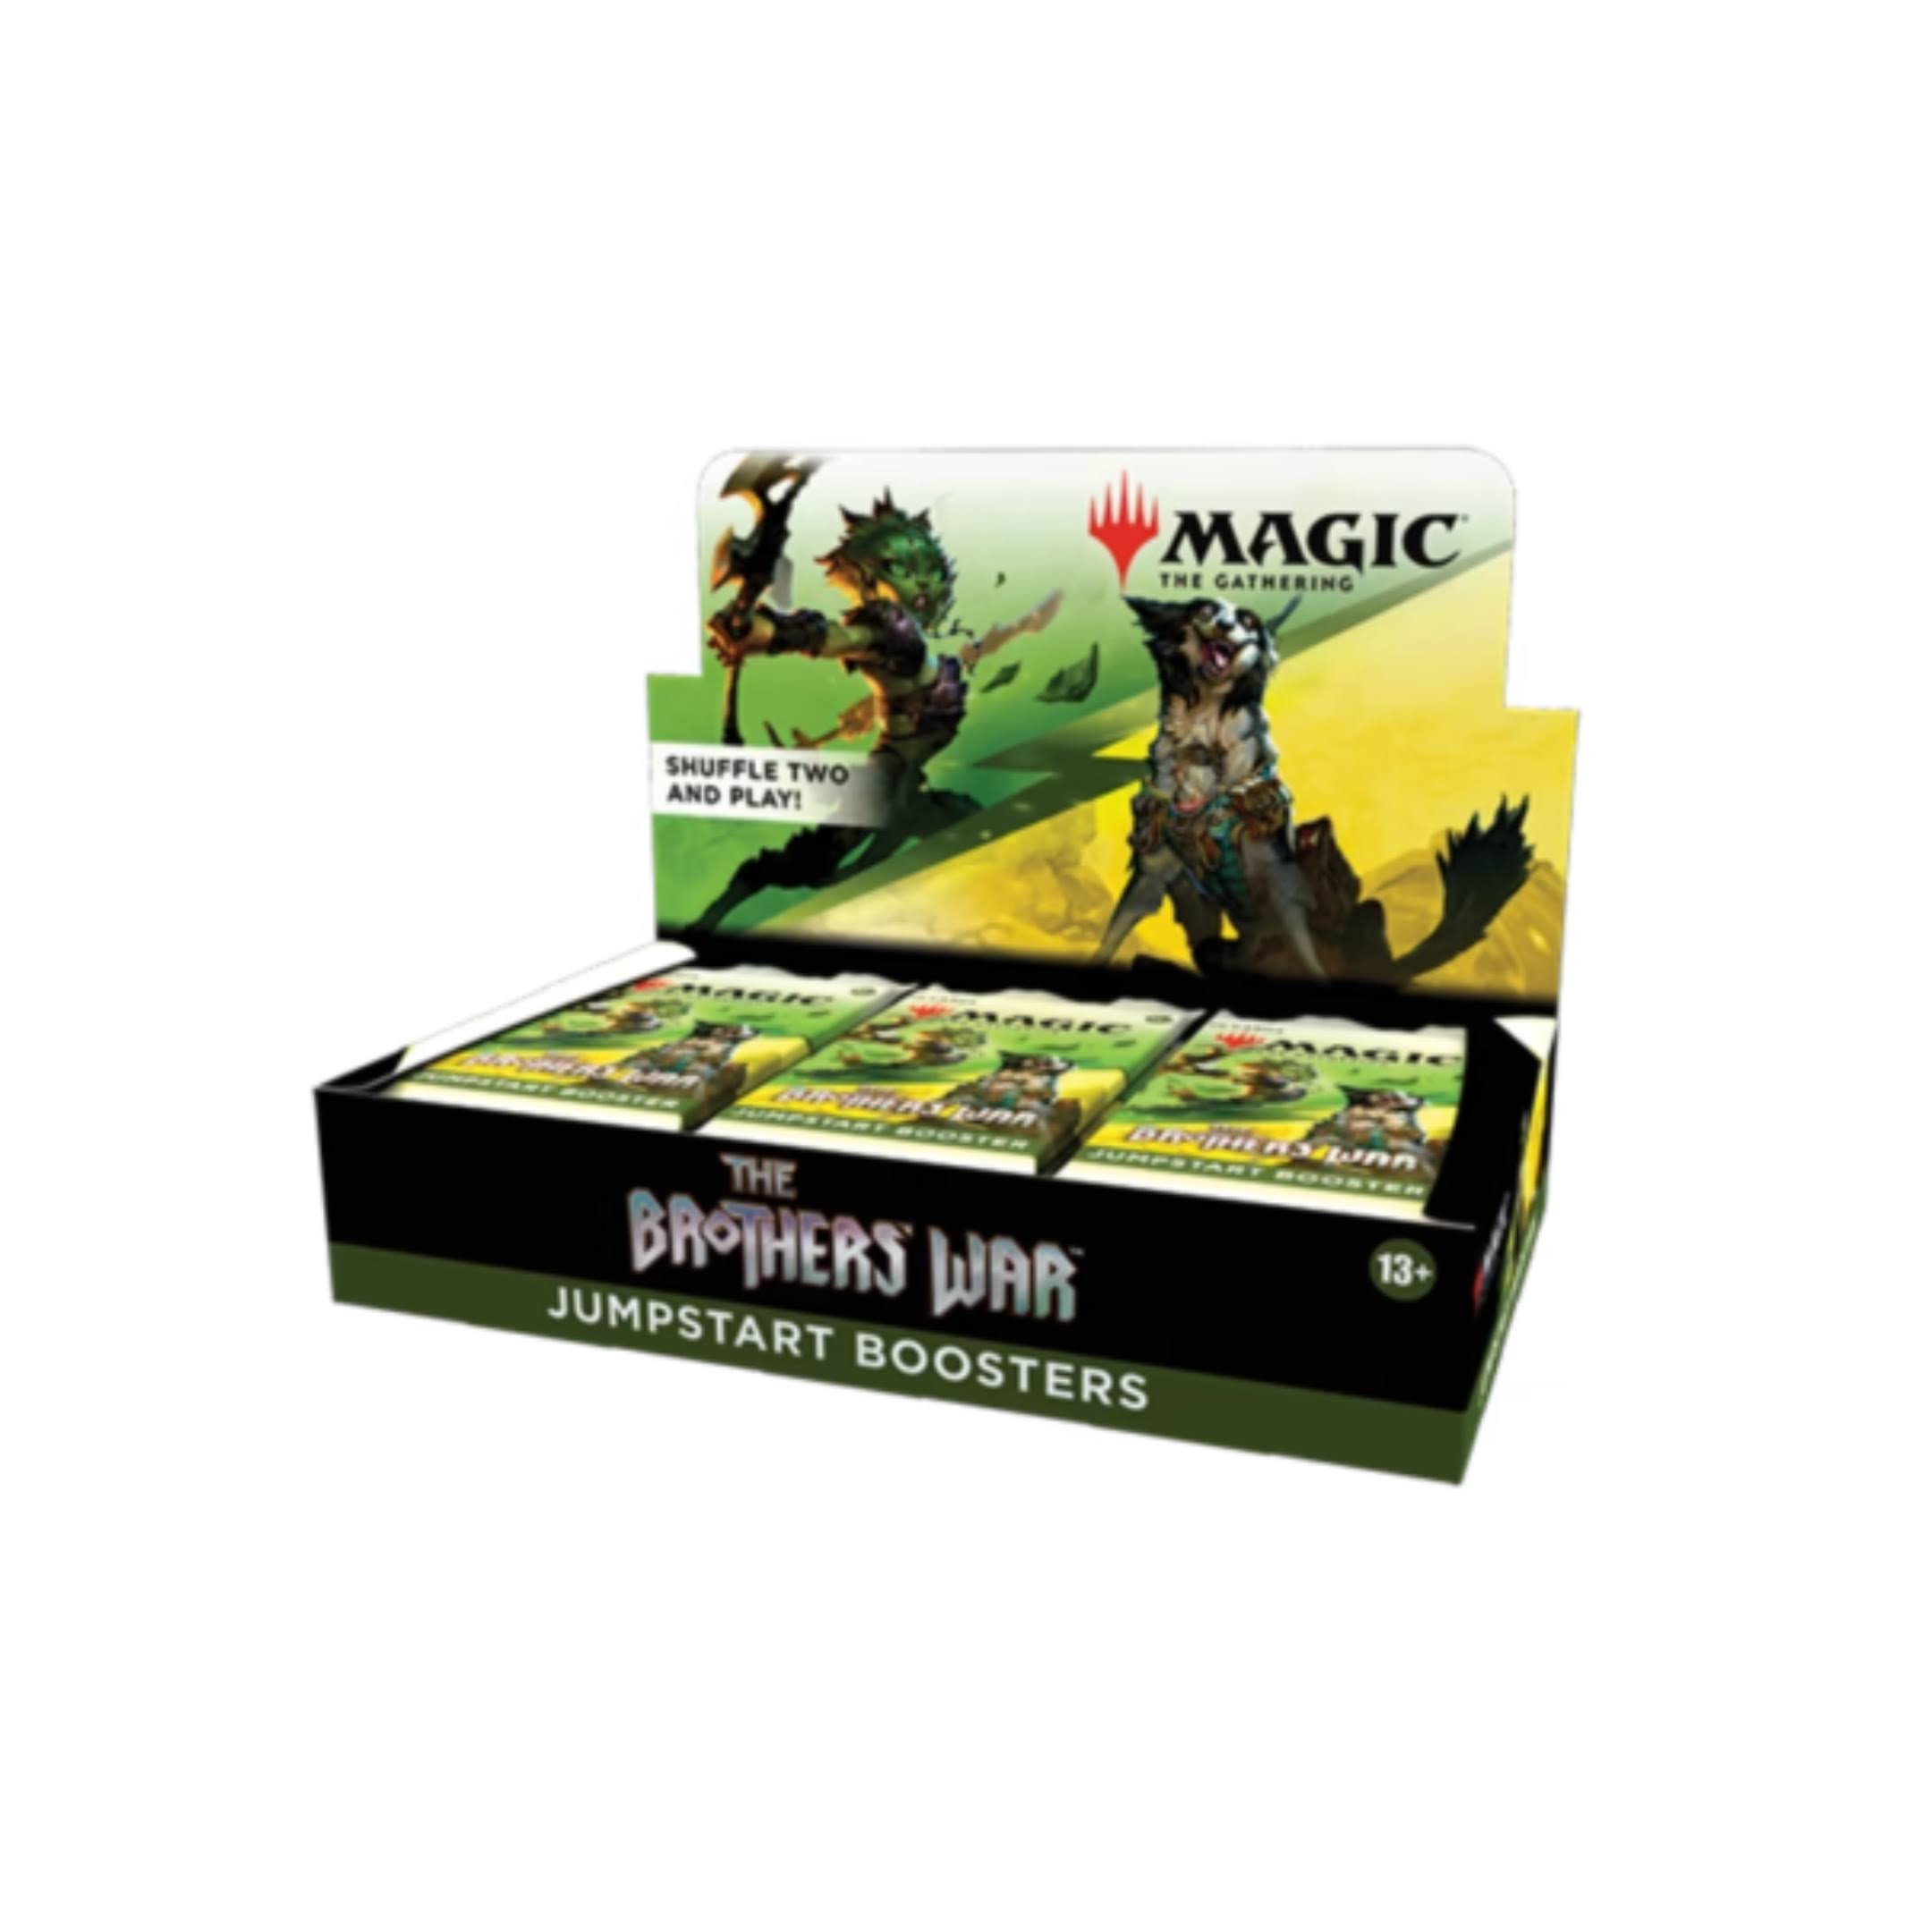 Magic The Gathering - The Brothers War Jumpstart Booster Box